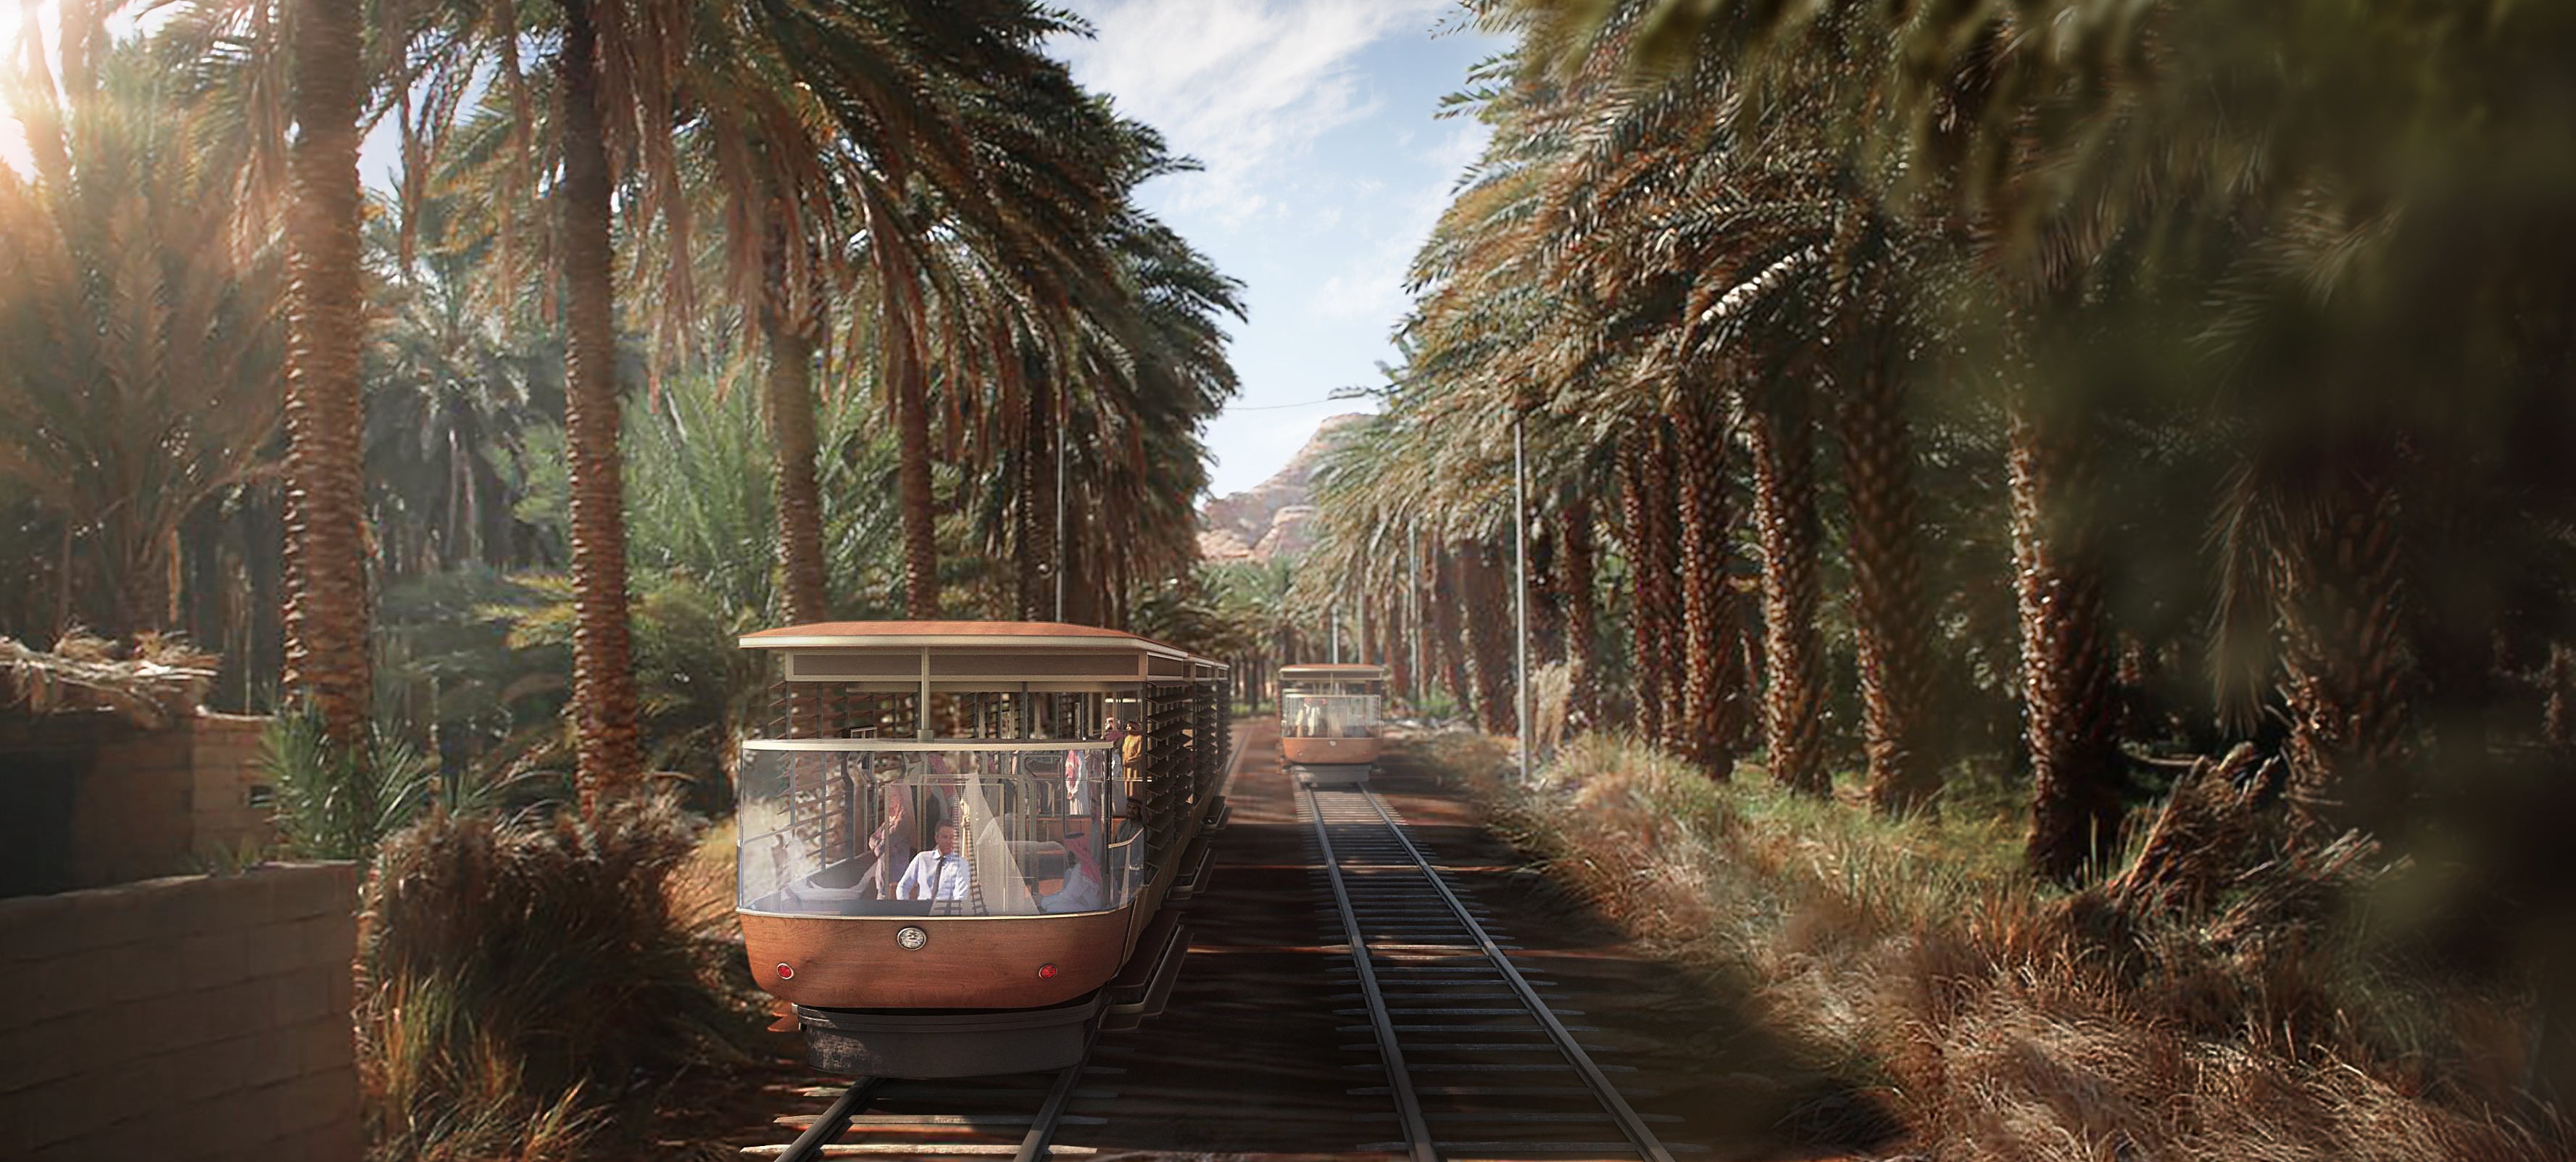 Sustainability is at the core of the Journey Through Time Masterplan and it includes a 46km low-carbon tramway